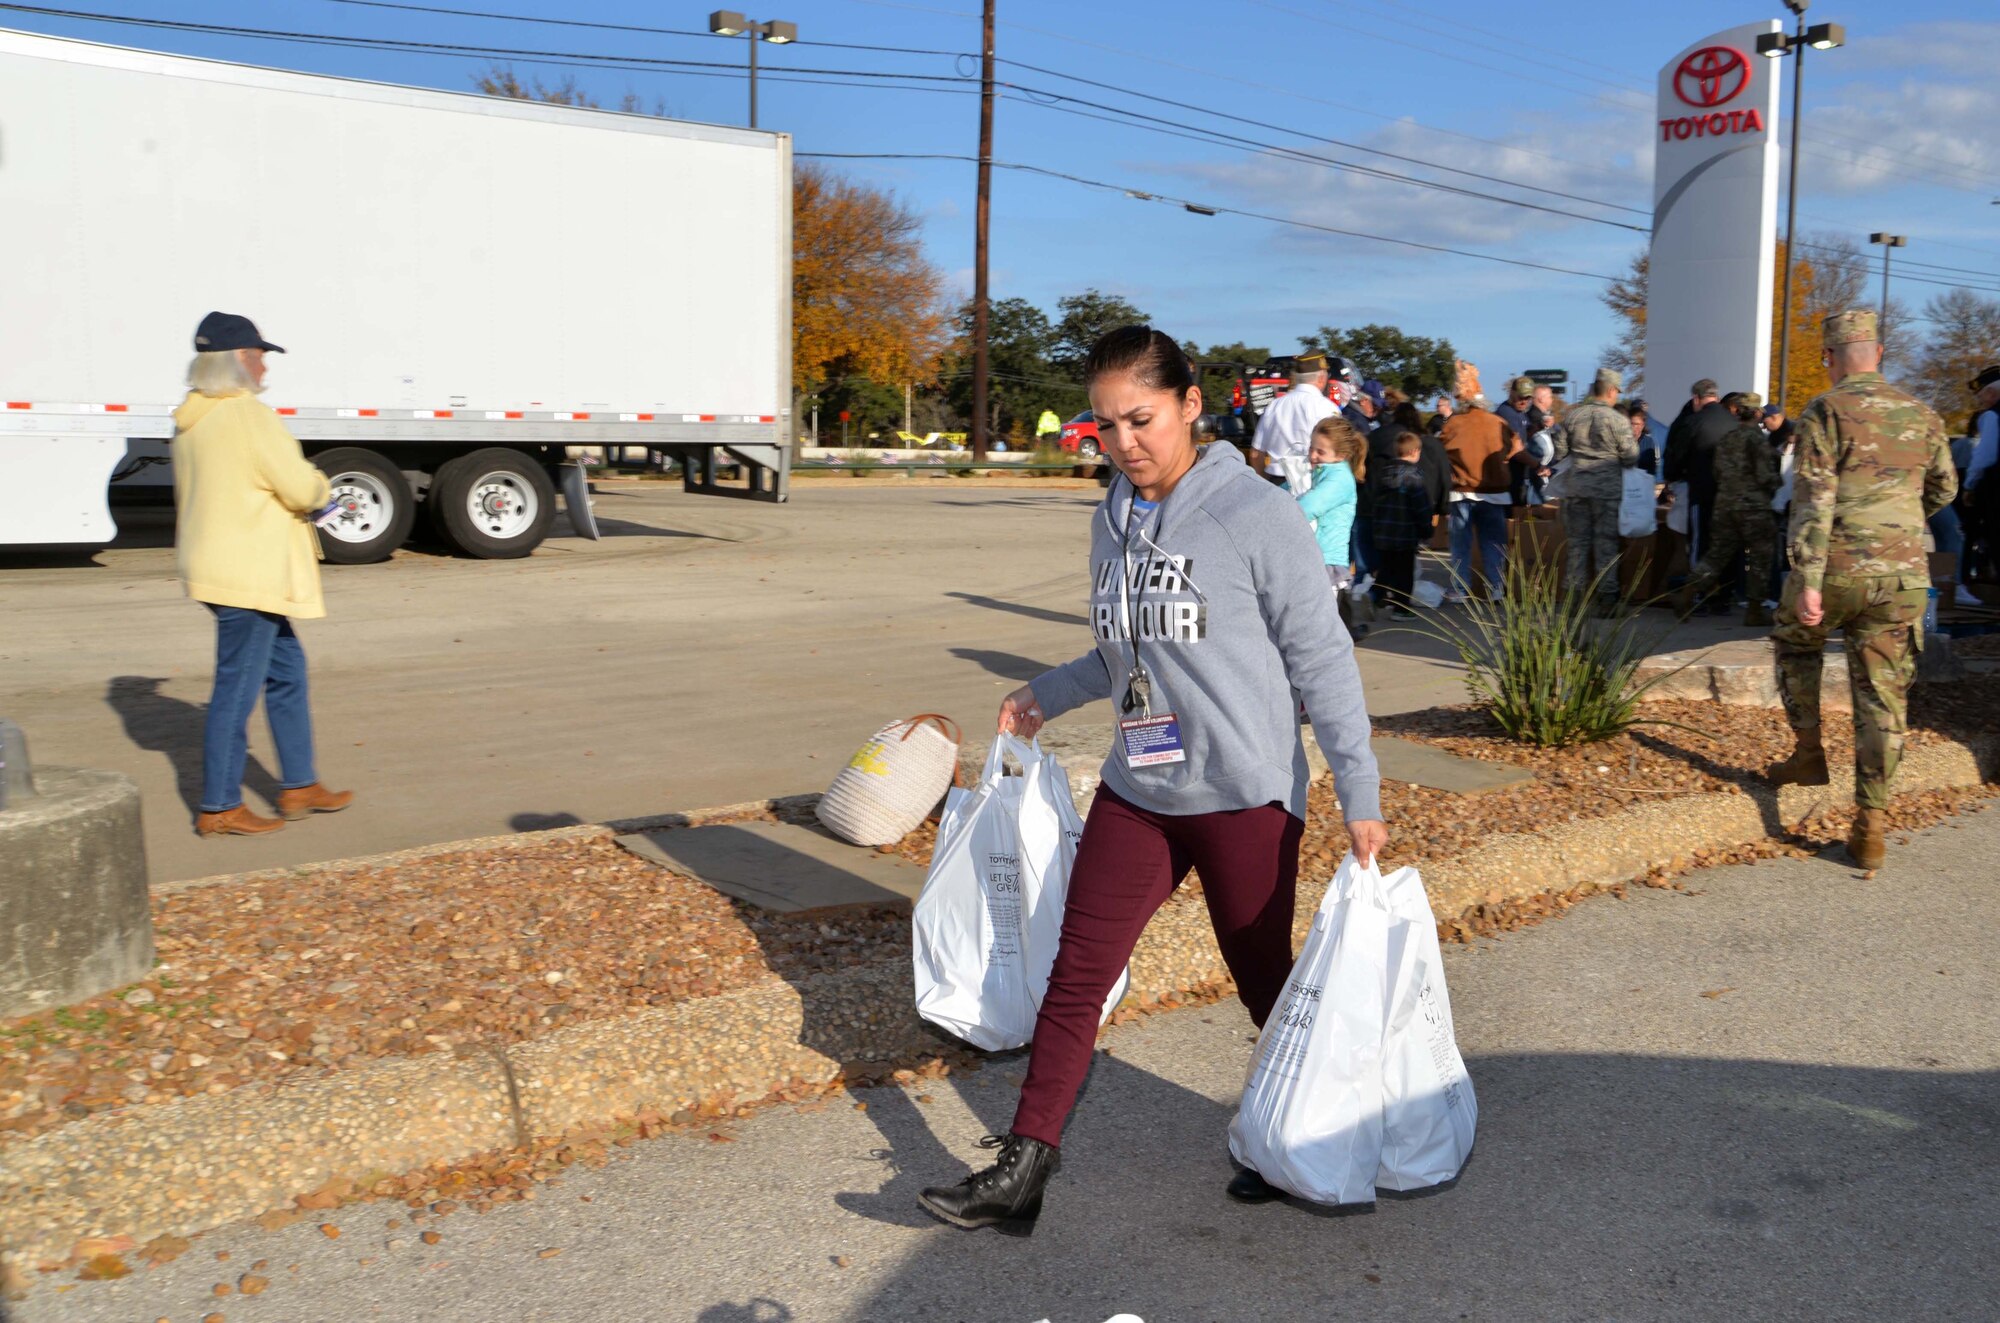 Senior Airman Michelle Quinterro, 433rd Airlift Wing staff, carries frozen turkeys to a line of cars at the ninth annual Turkeys for Troops event at Toyota of Boerne Nov. 22, 2019, in Boerne, Texas. (U.S. Air Force photo by Master Sgt. Kristian Carter)